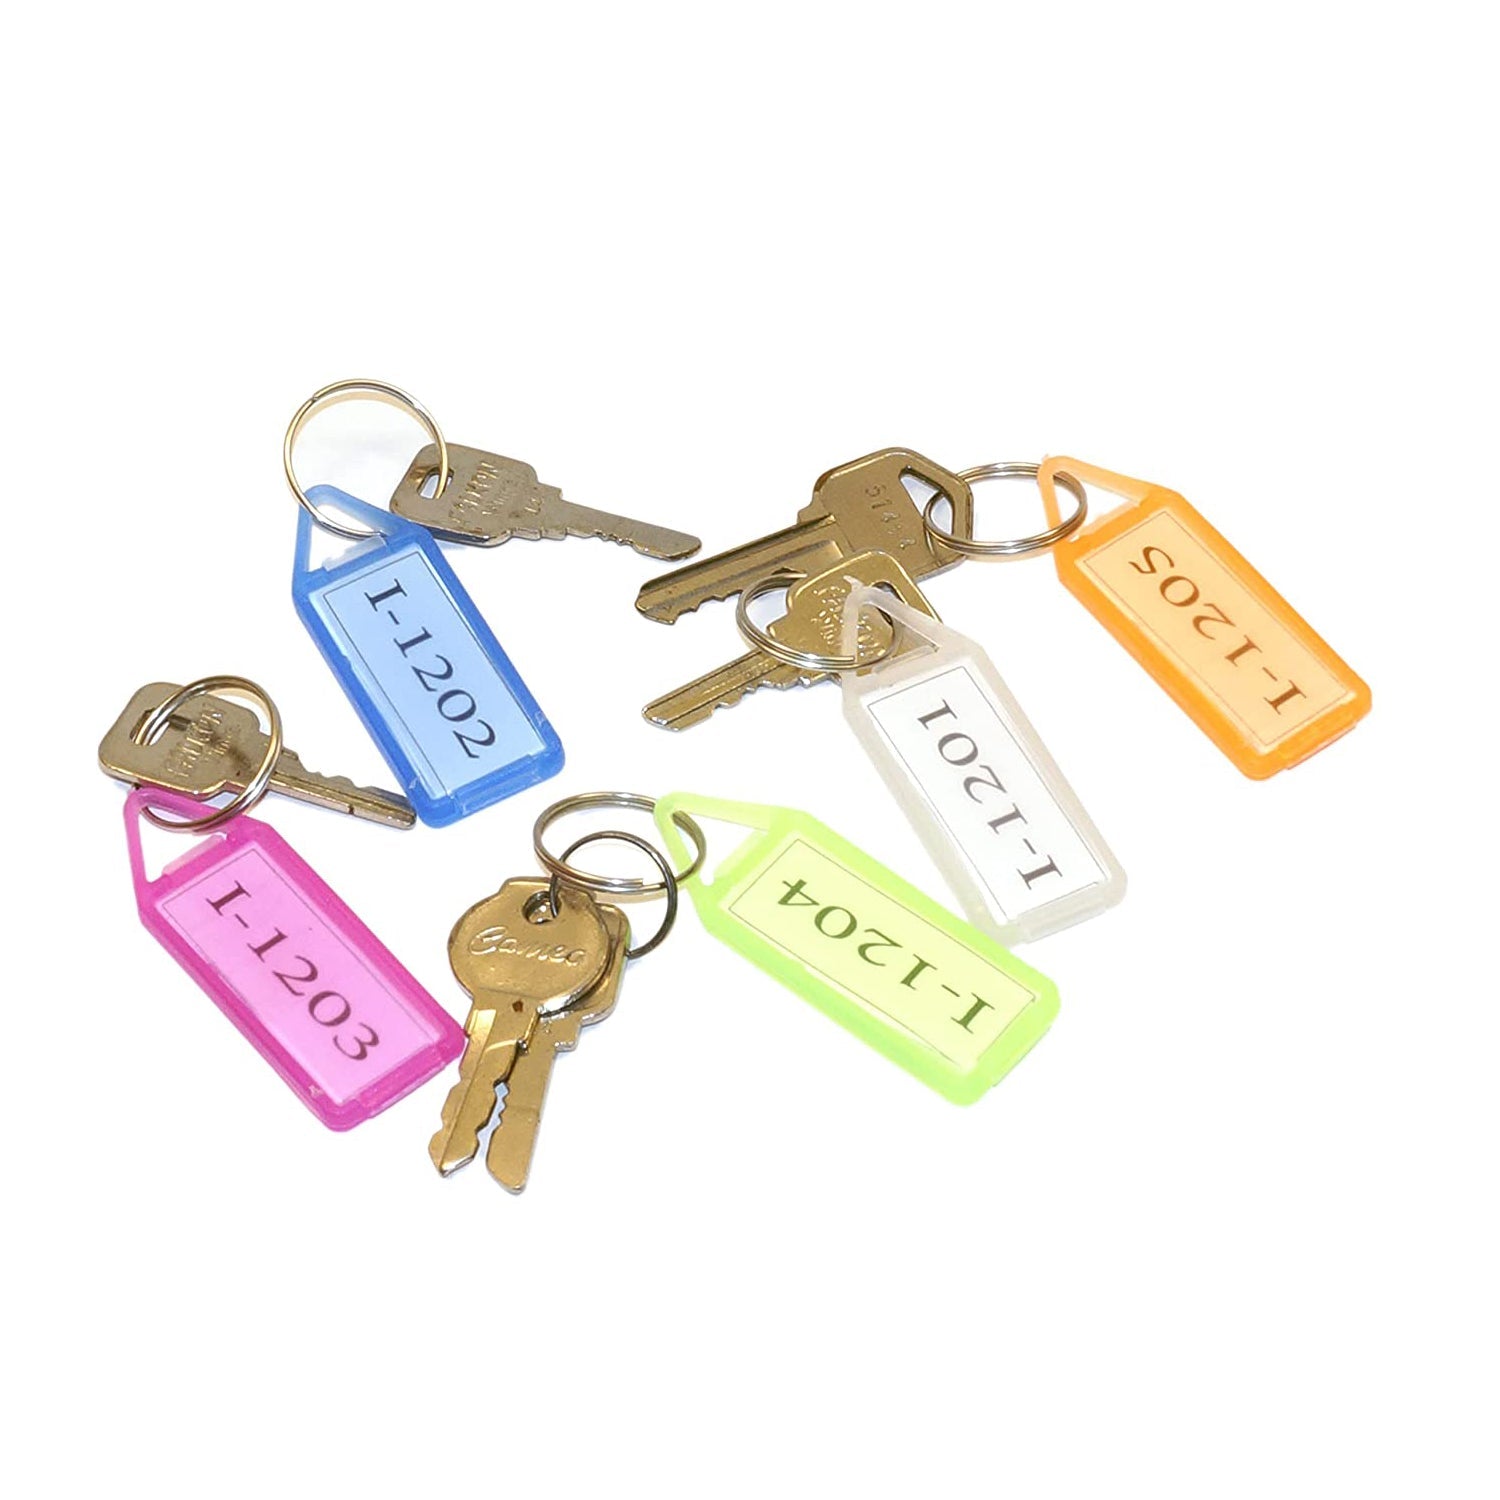 6170 50Pc Keychain Tag Label Used For Decorative Purpose On Keys And All.